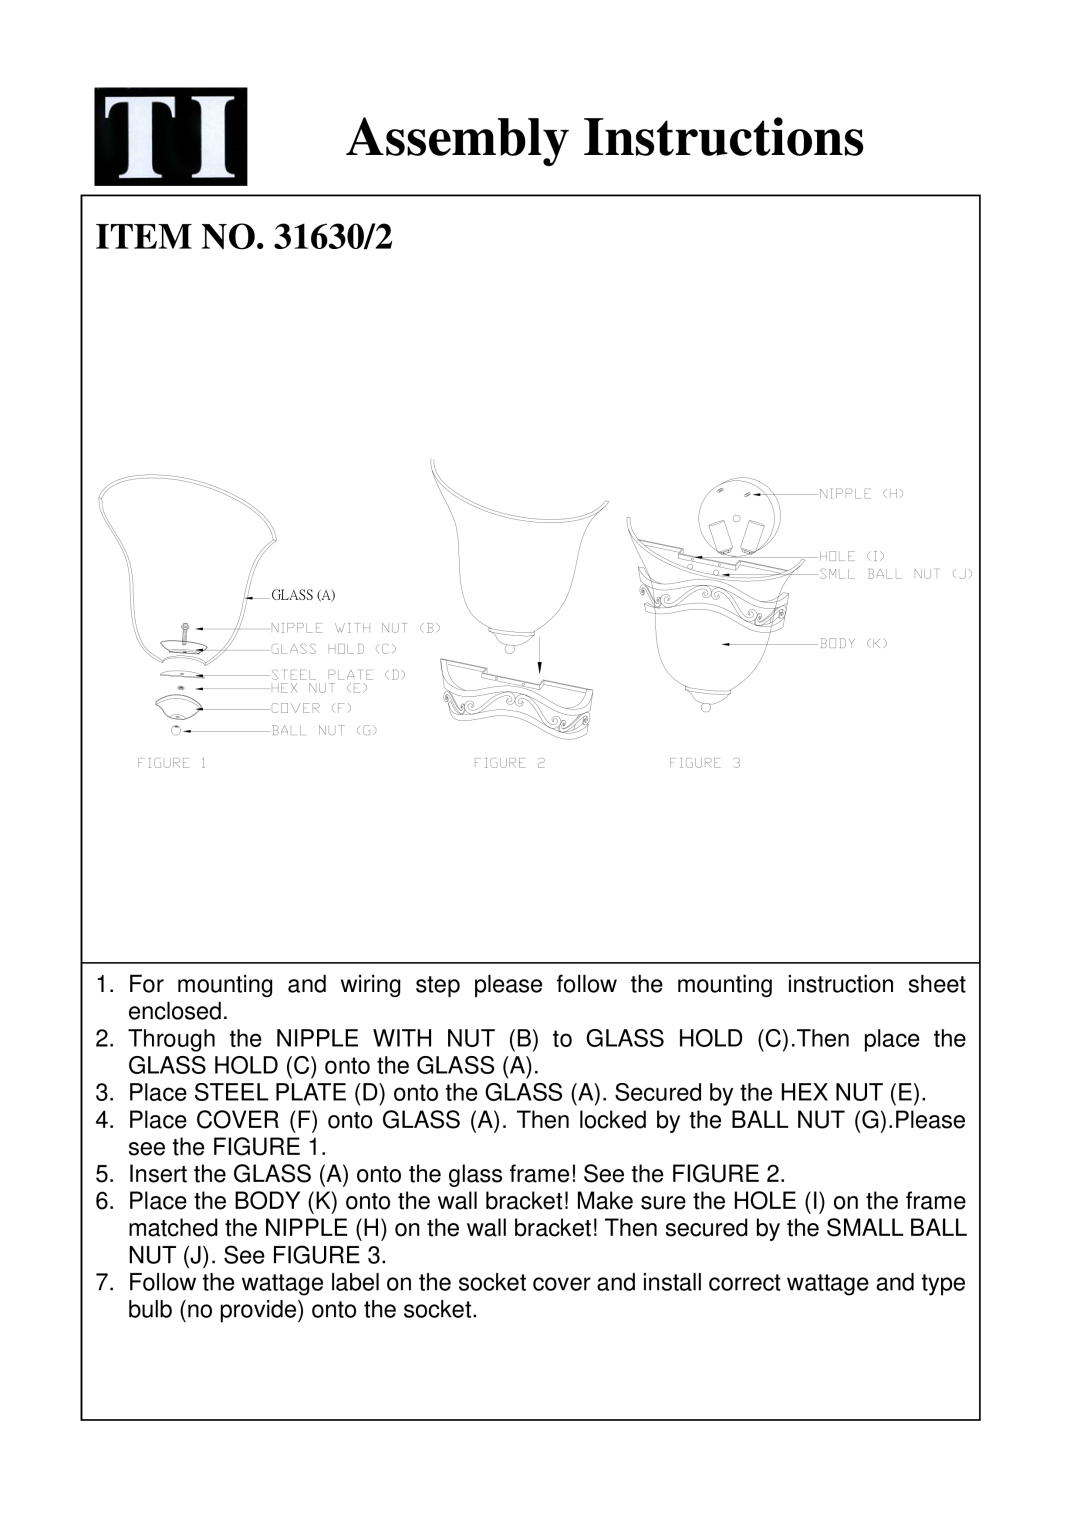 Triarch instruction sheet Assembly Instructions, ITEM NO. 31630/2 